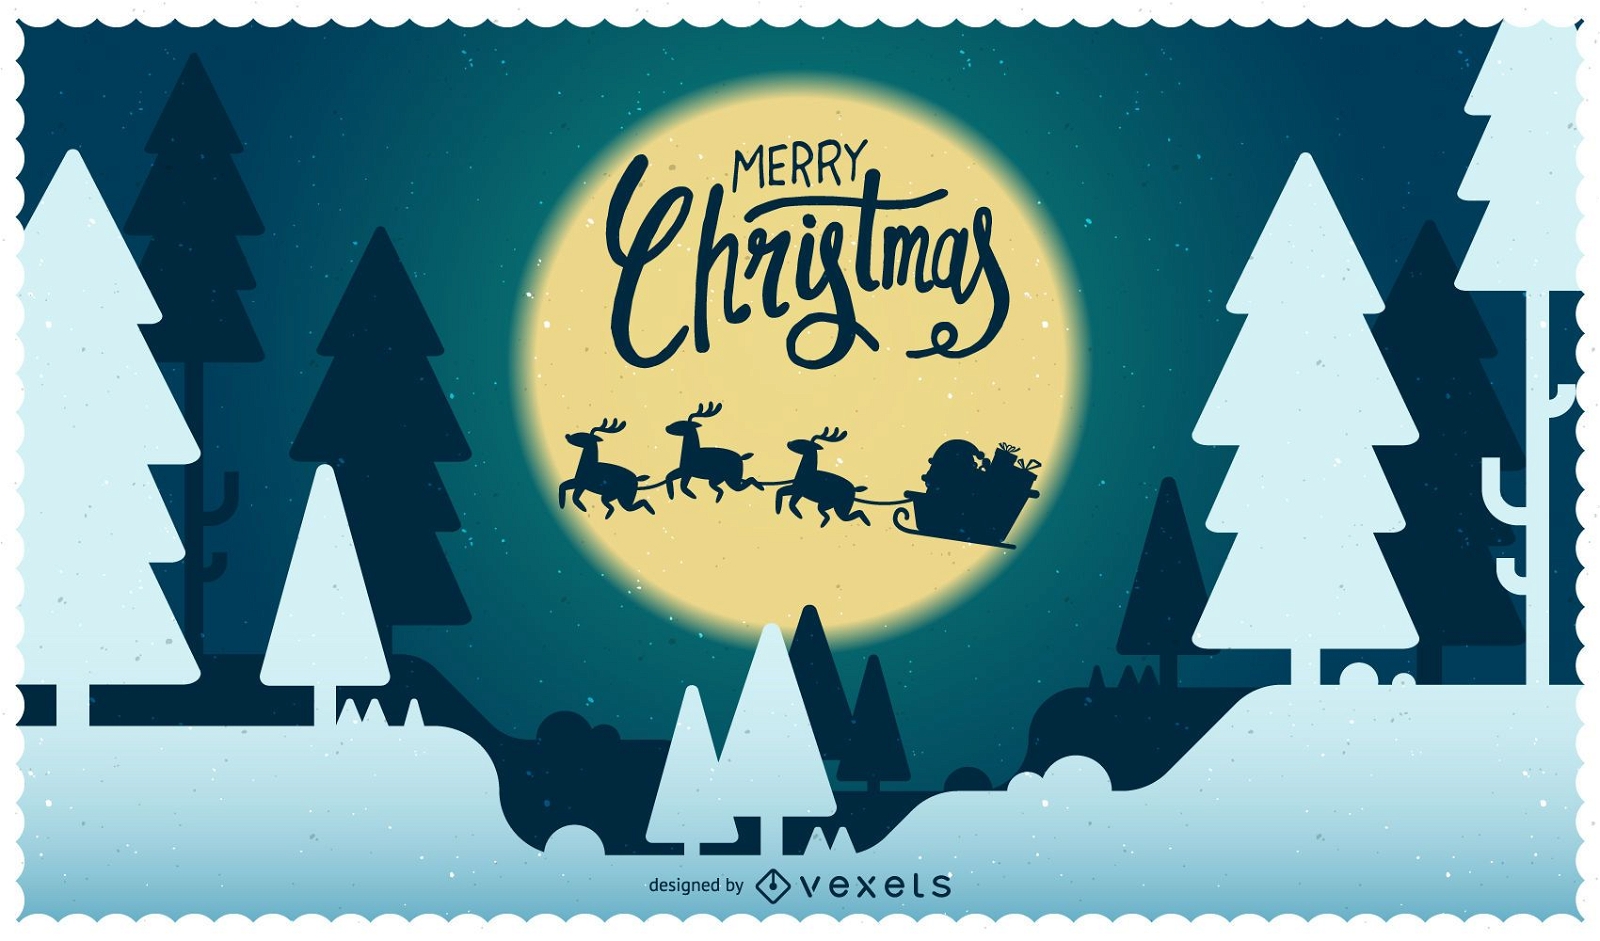 Christmas illustration with Santa and reindeer silhouette